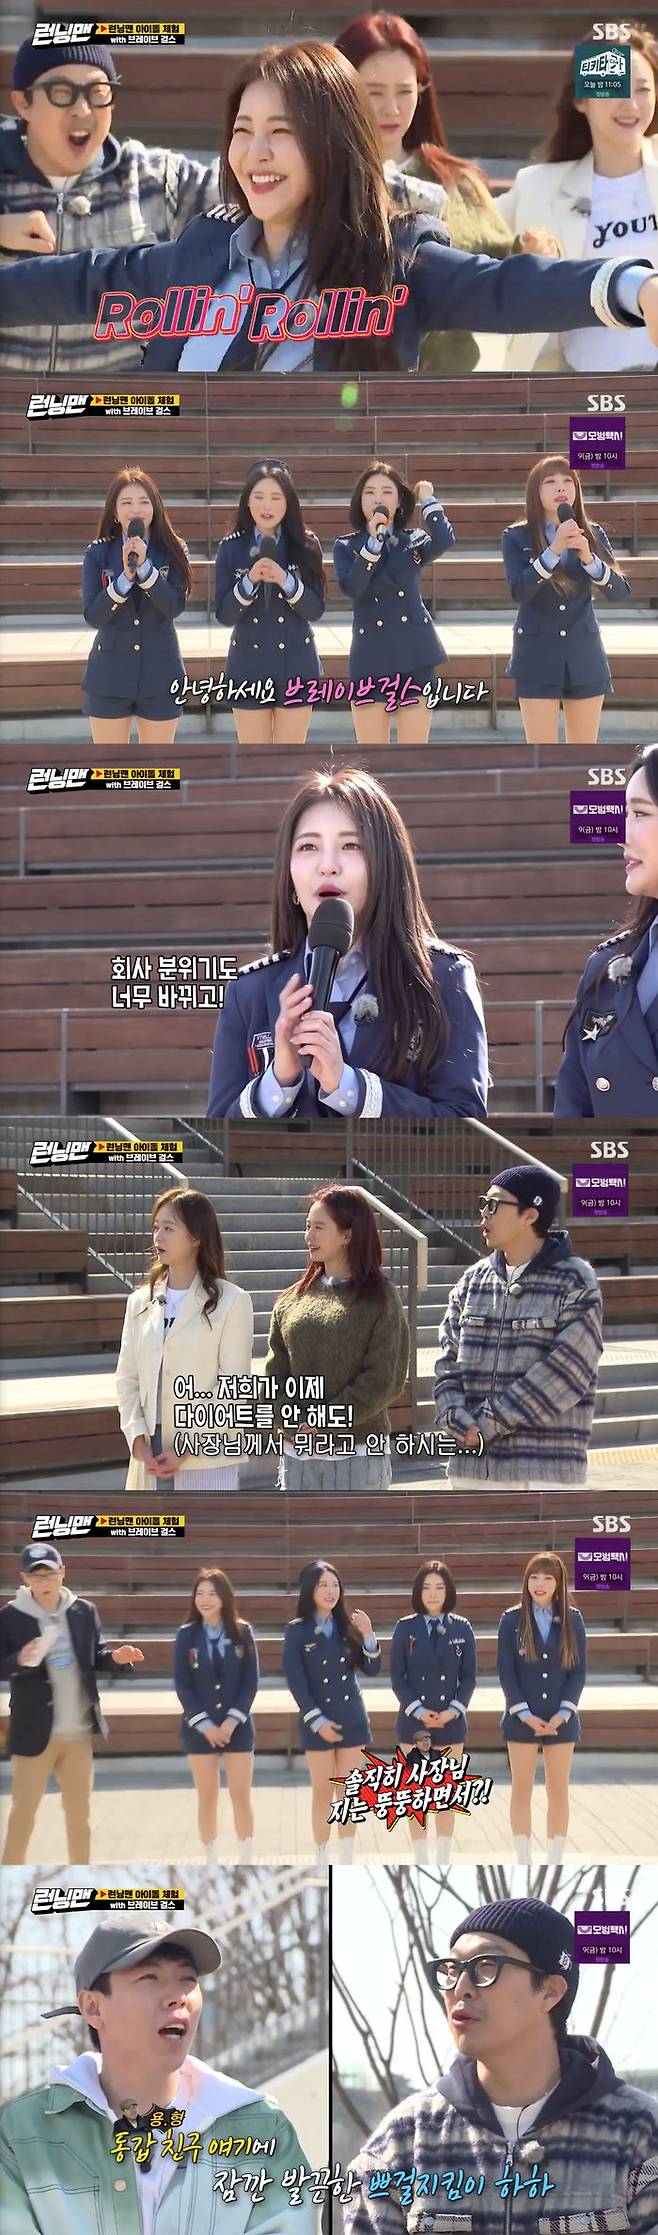 Brave Girls made their debut performance with Running Man.On SBS Running Man broadcasted on the 4th, Brave Idol Day Race was held with Brave Girls who recorded the reverse Shinhwa.On the day of the show, Brave Girls showed Rolin stage, which recorded various charts on the first place on the wheatboard.Uncle fans from Yoo Jae-Suk to Yang Se-chan were enthusiastic about showing Rollin dance.About Brave Girls, who wrote the Shinhwa of the reverse in four years, the members celebrated, Its really a celebration, how hard it has been to celebrate so far.And Yoo Jae-Suk noted the mood that changed in two weeks, saying, Ive seen you in another program and Ive seen you in two weeks.The company atmosphere has changed so much, and now the company is also monitoring for the first time. Brave Girls also mentioned the biggest change, saying, Even if you do not do Diet, Sandpit does not say anything.Haha said, Sandpit is fat and what is it to who? He laughed at the brave brother of the same age.On the other hand, on the same day, Brave Girls said that the entertainment that he wanted to appear most was Running Man, revealing the expectation of broadcasting today.